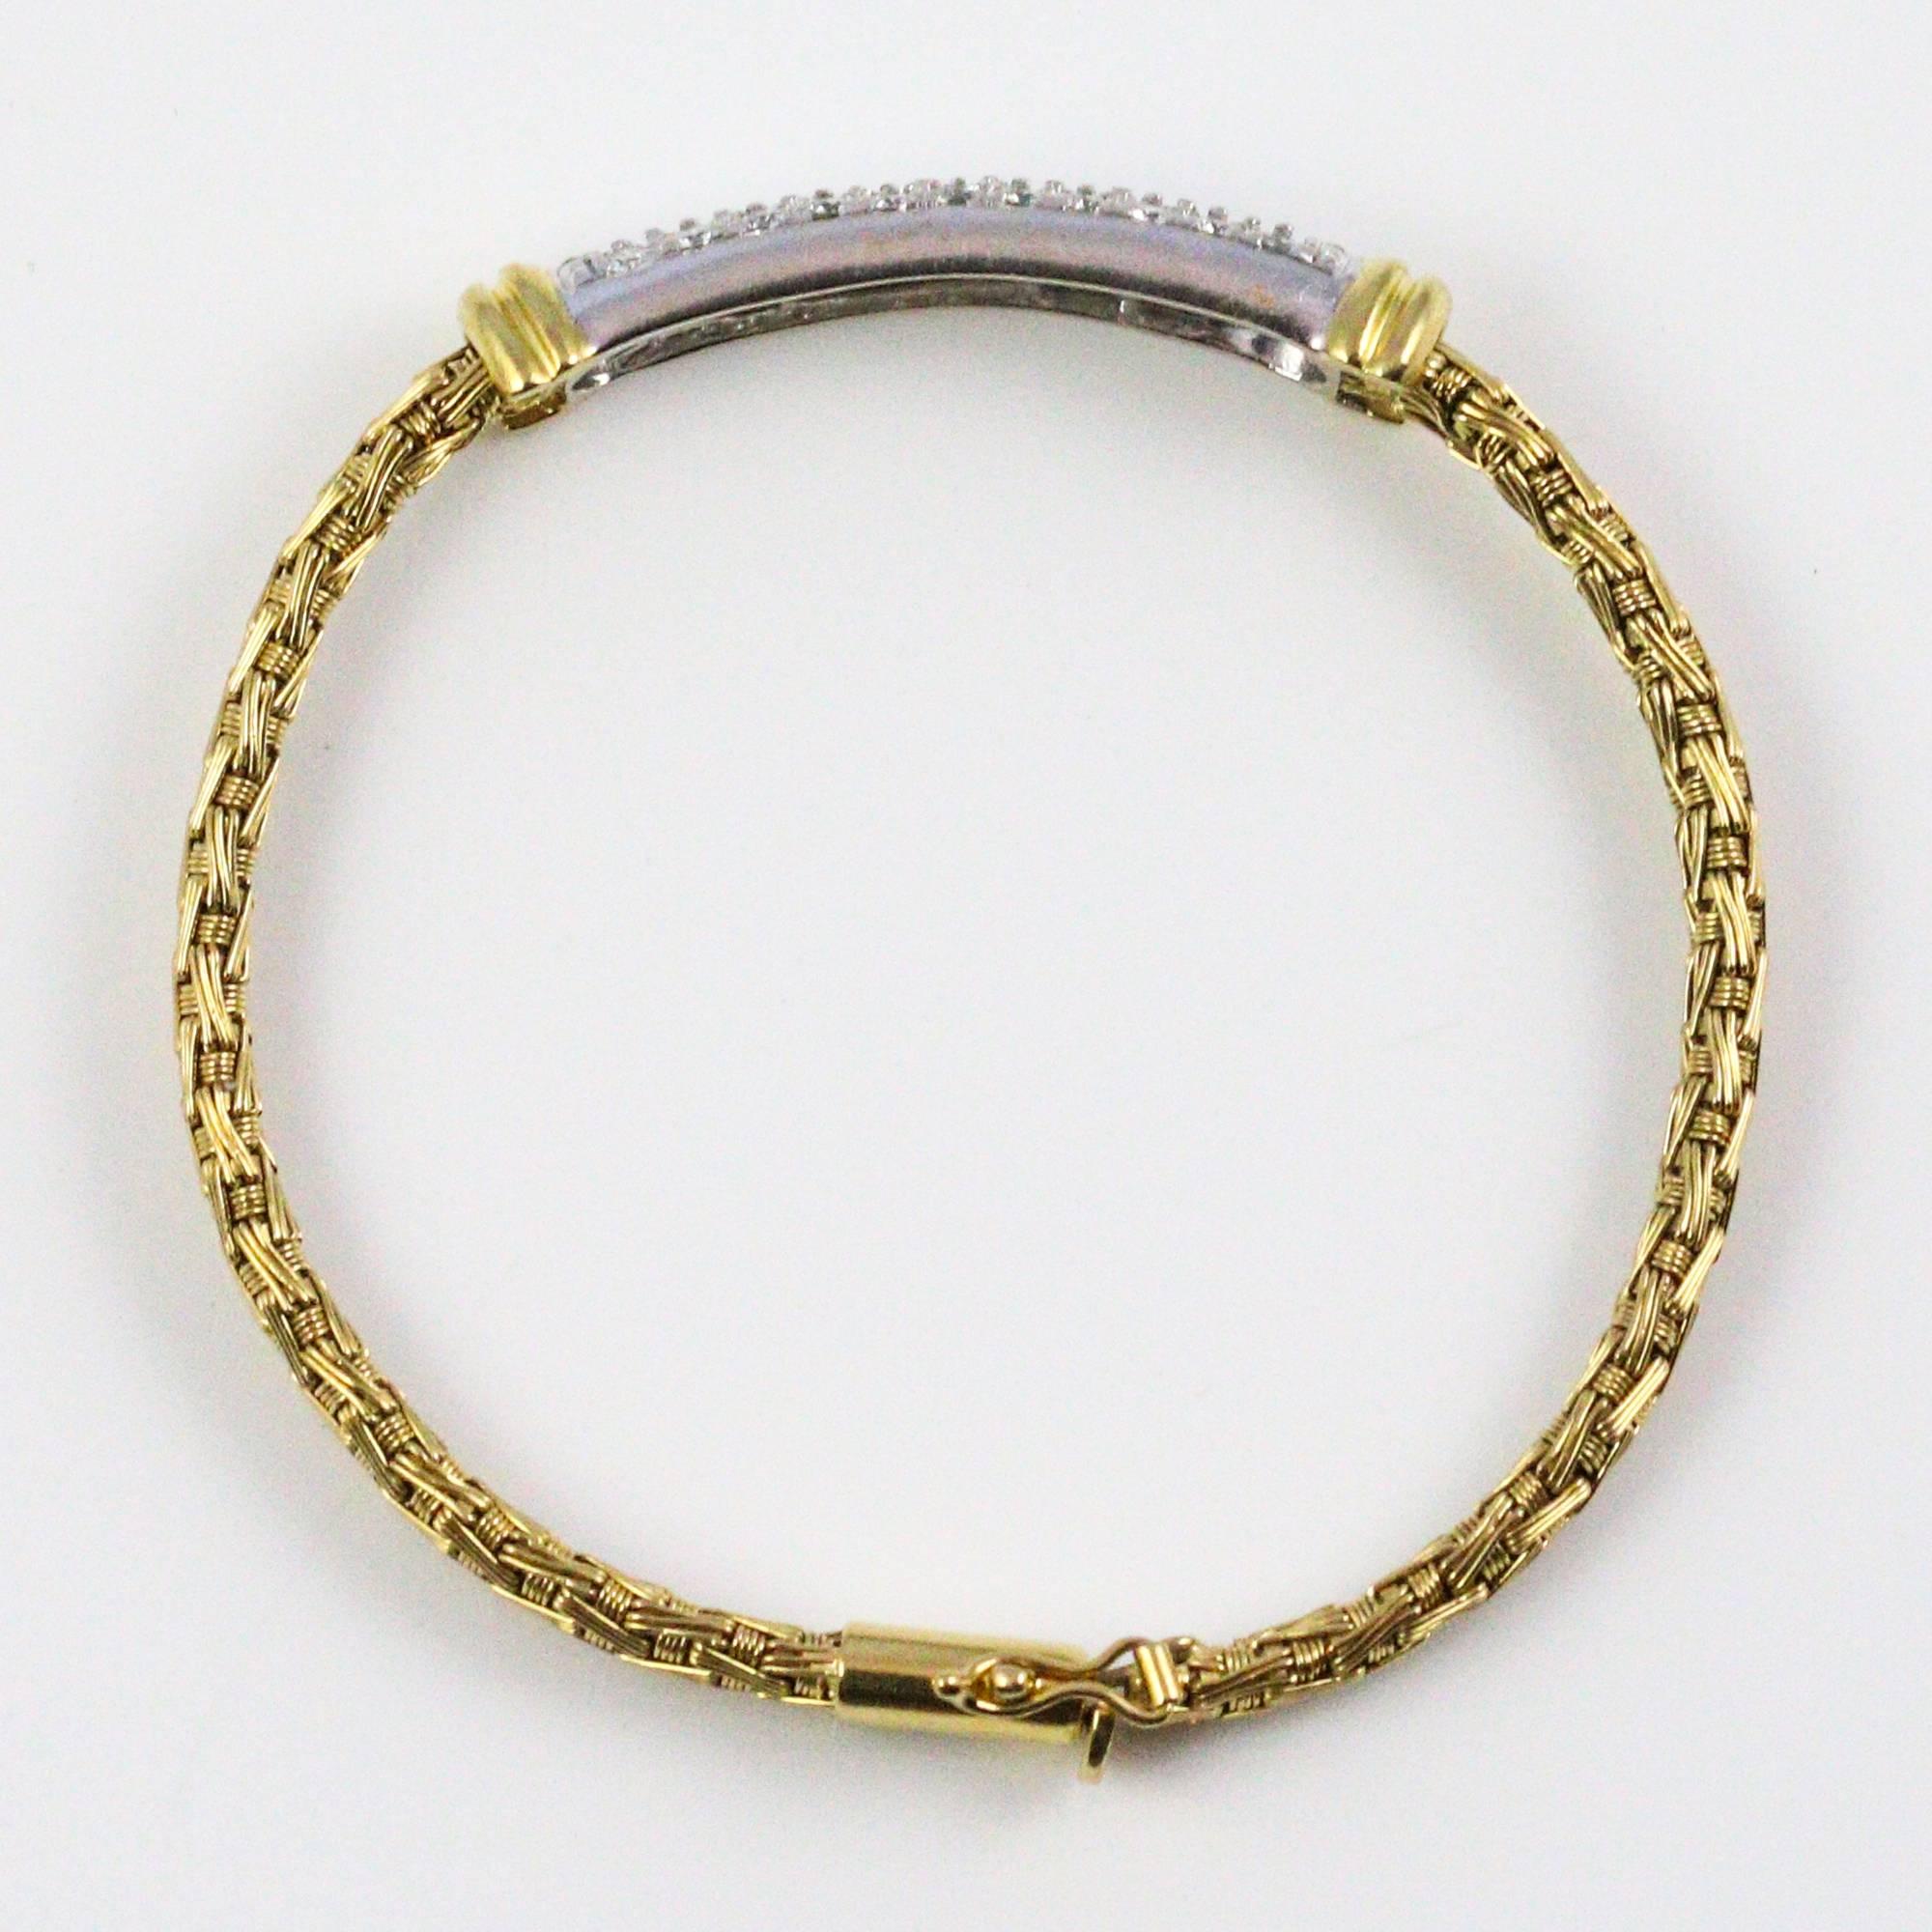 This gorgeous bracelet features a woven design of 18k yellow gold topped with 34 pave set diamonds, backed in white gold weighing a total of 1.46ctw and grading as "F-G" in color and "VS1-2" in clarity. Next to the hallmarks on